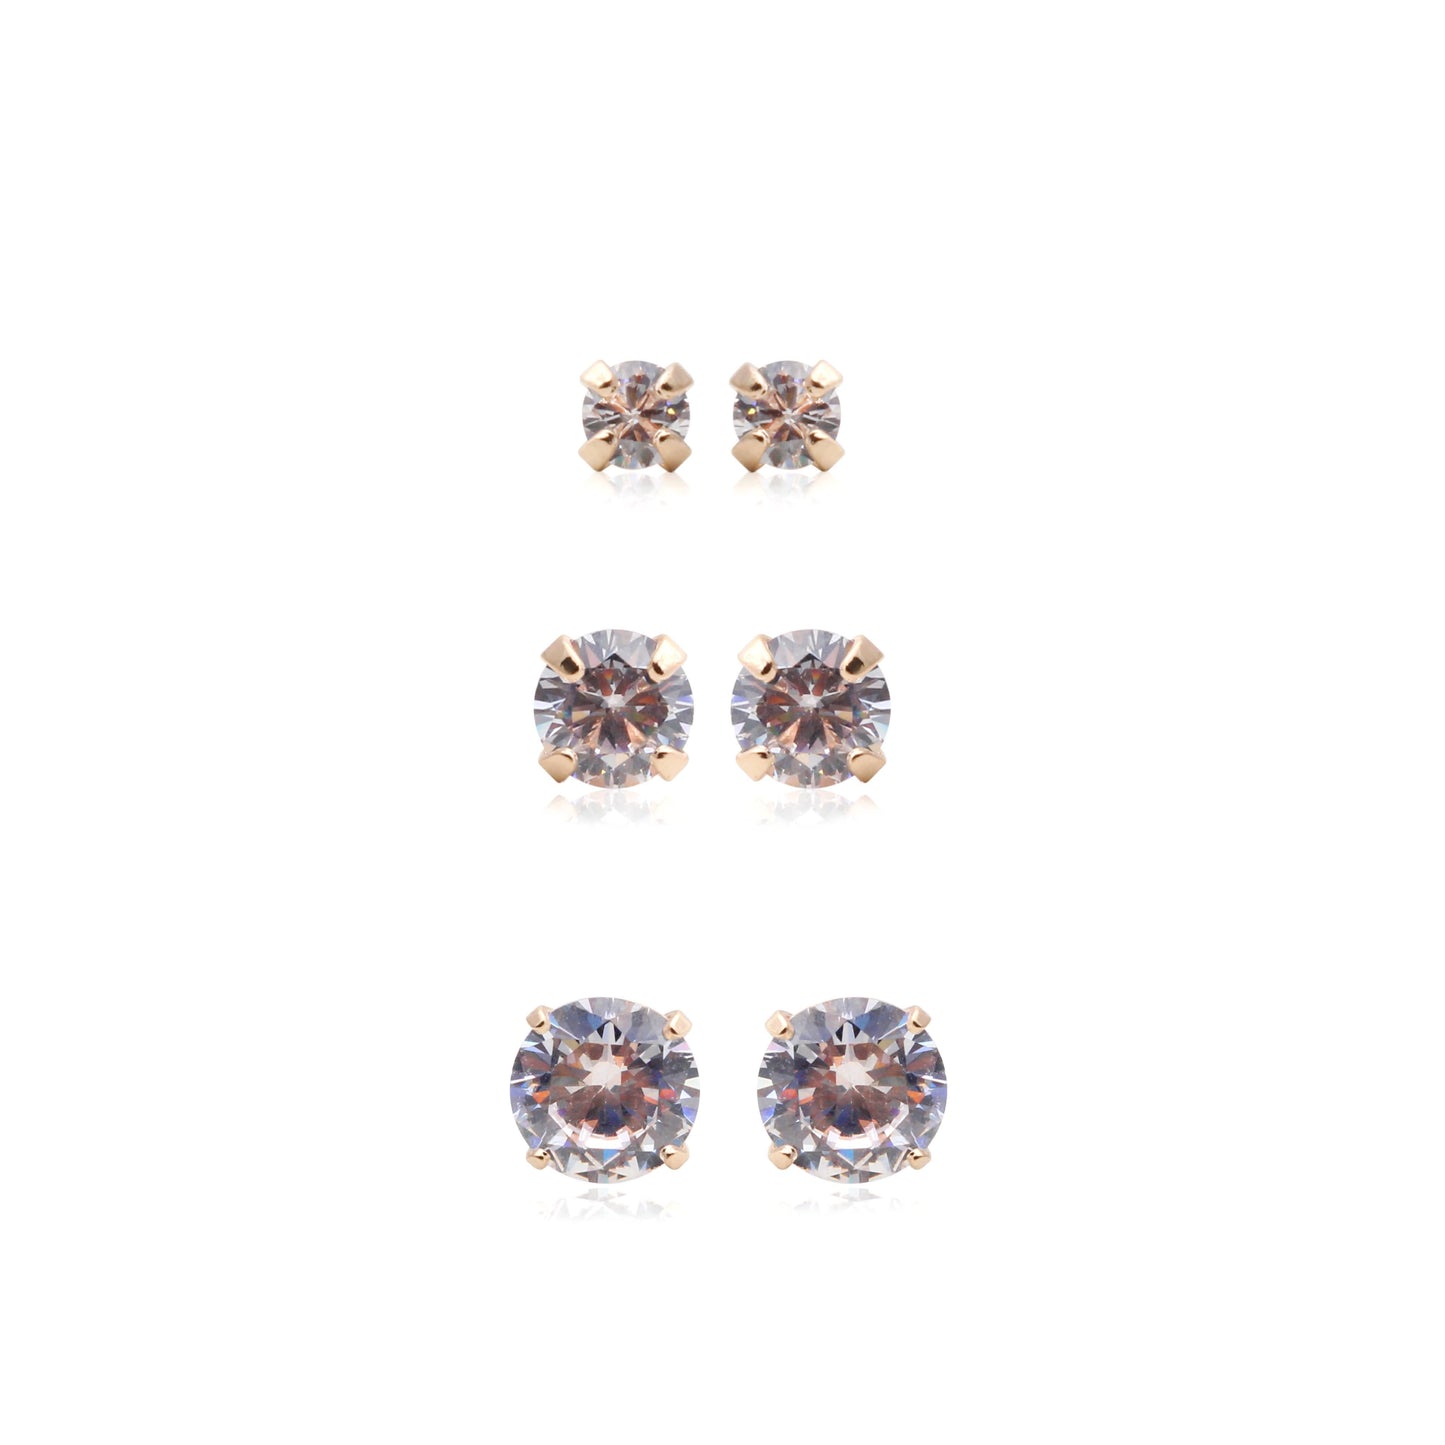 Solitaire earrings in 18k gold plating 3MM, 5MM, 7MM